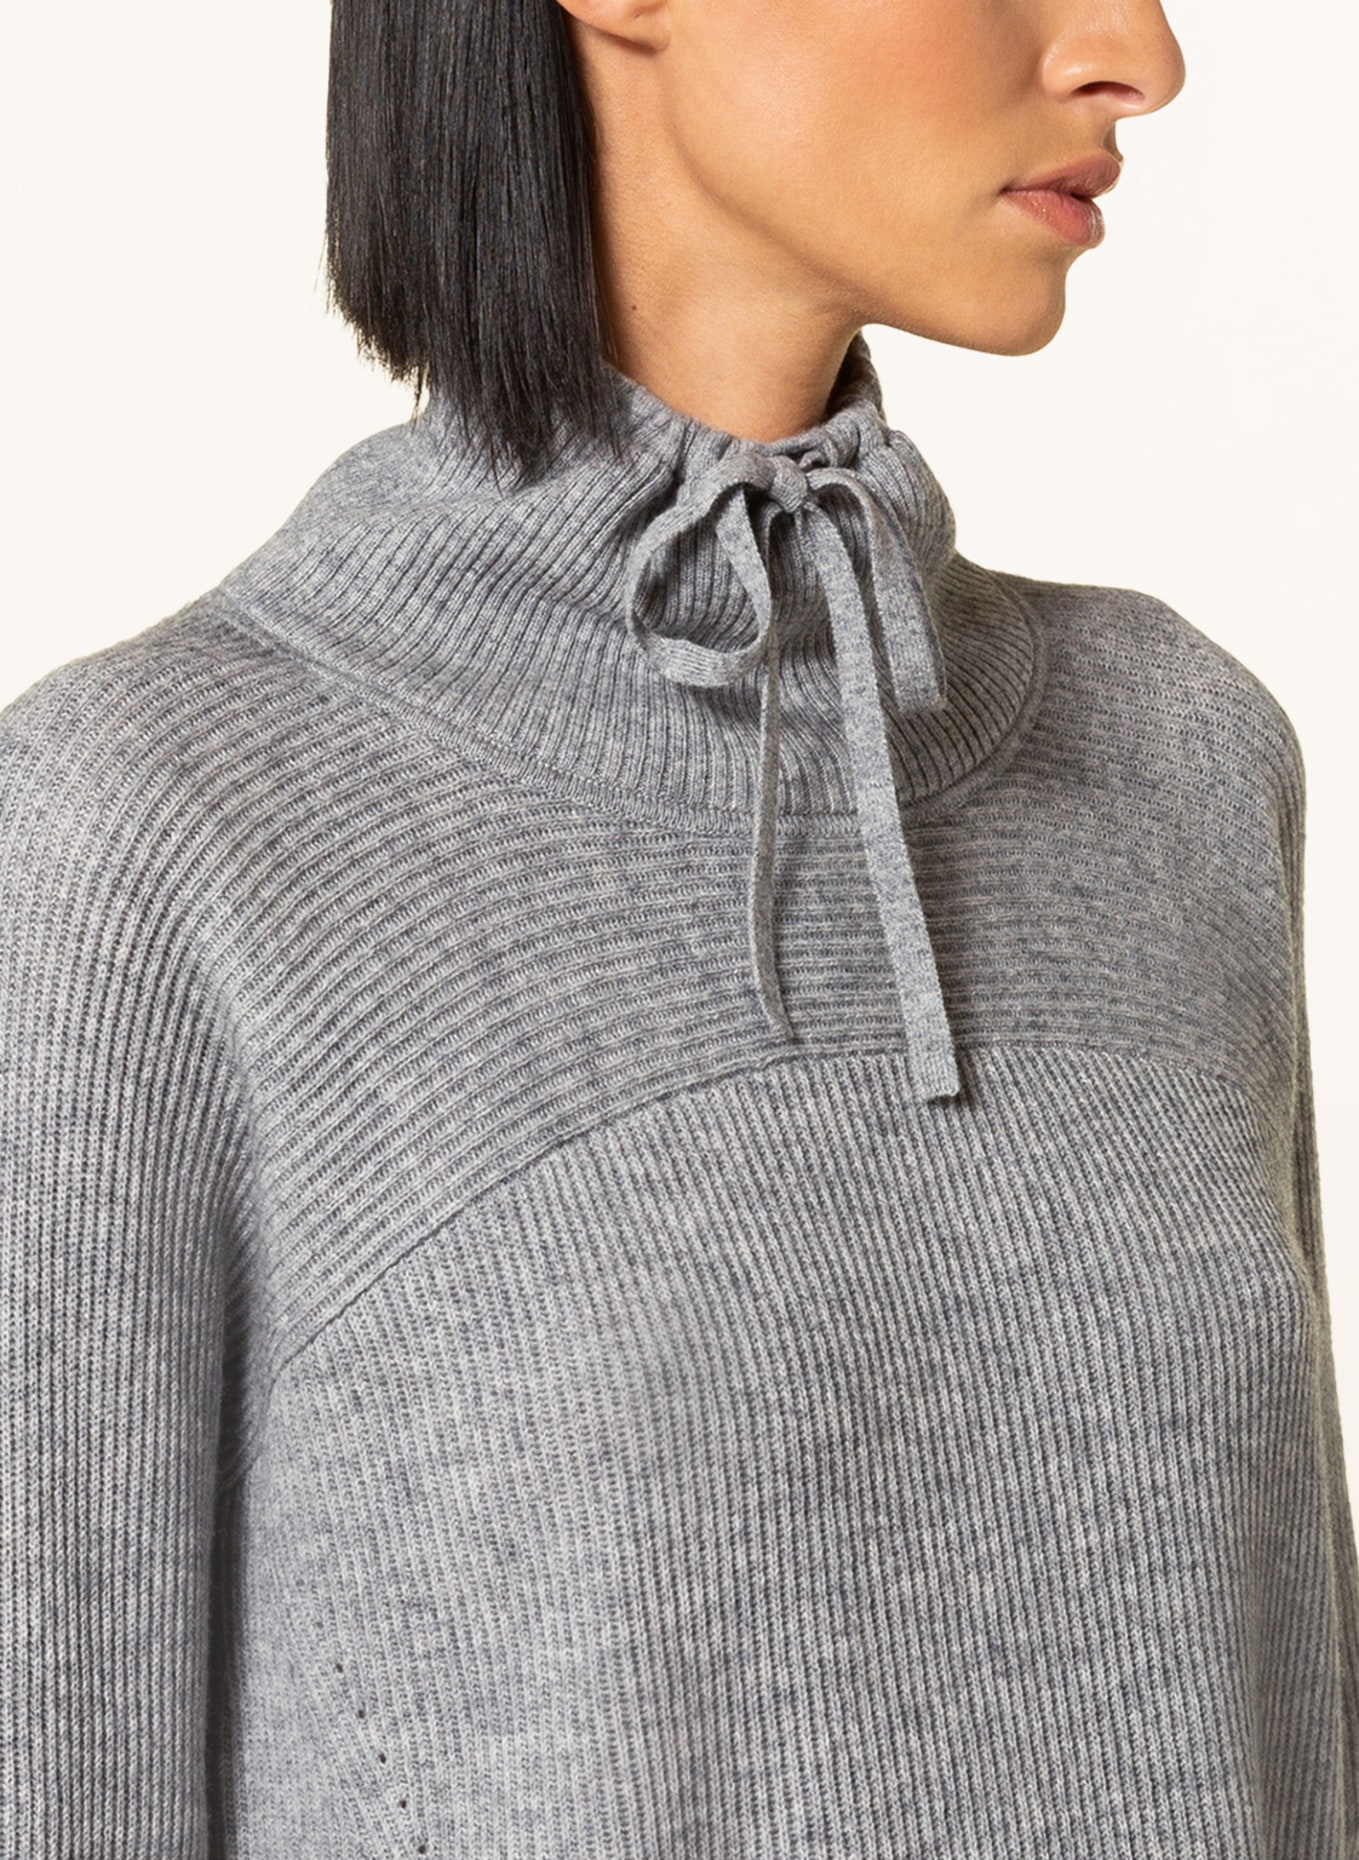 REPEAT Sweater, Color: GRAY (Image 4)